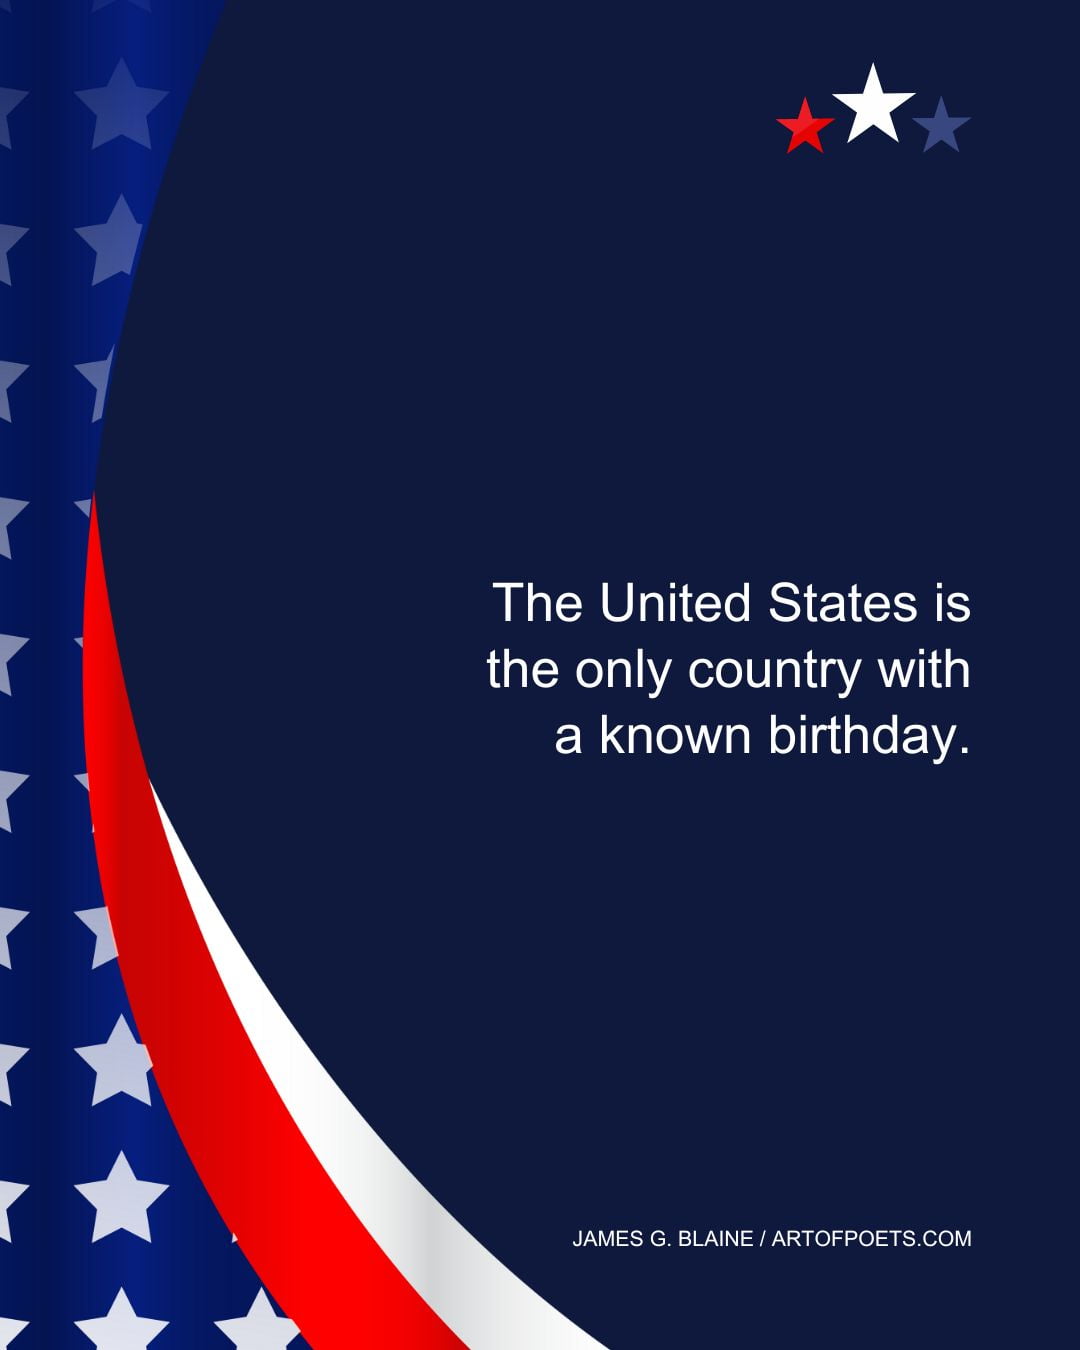 The United States is the only country with a known birthday